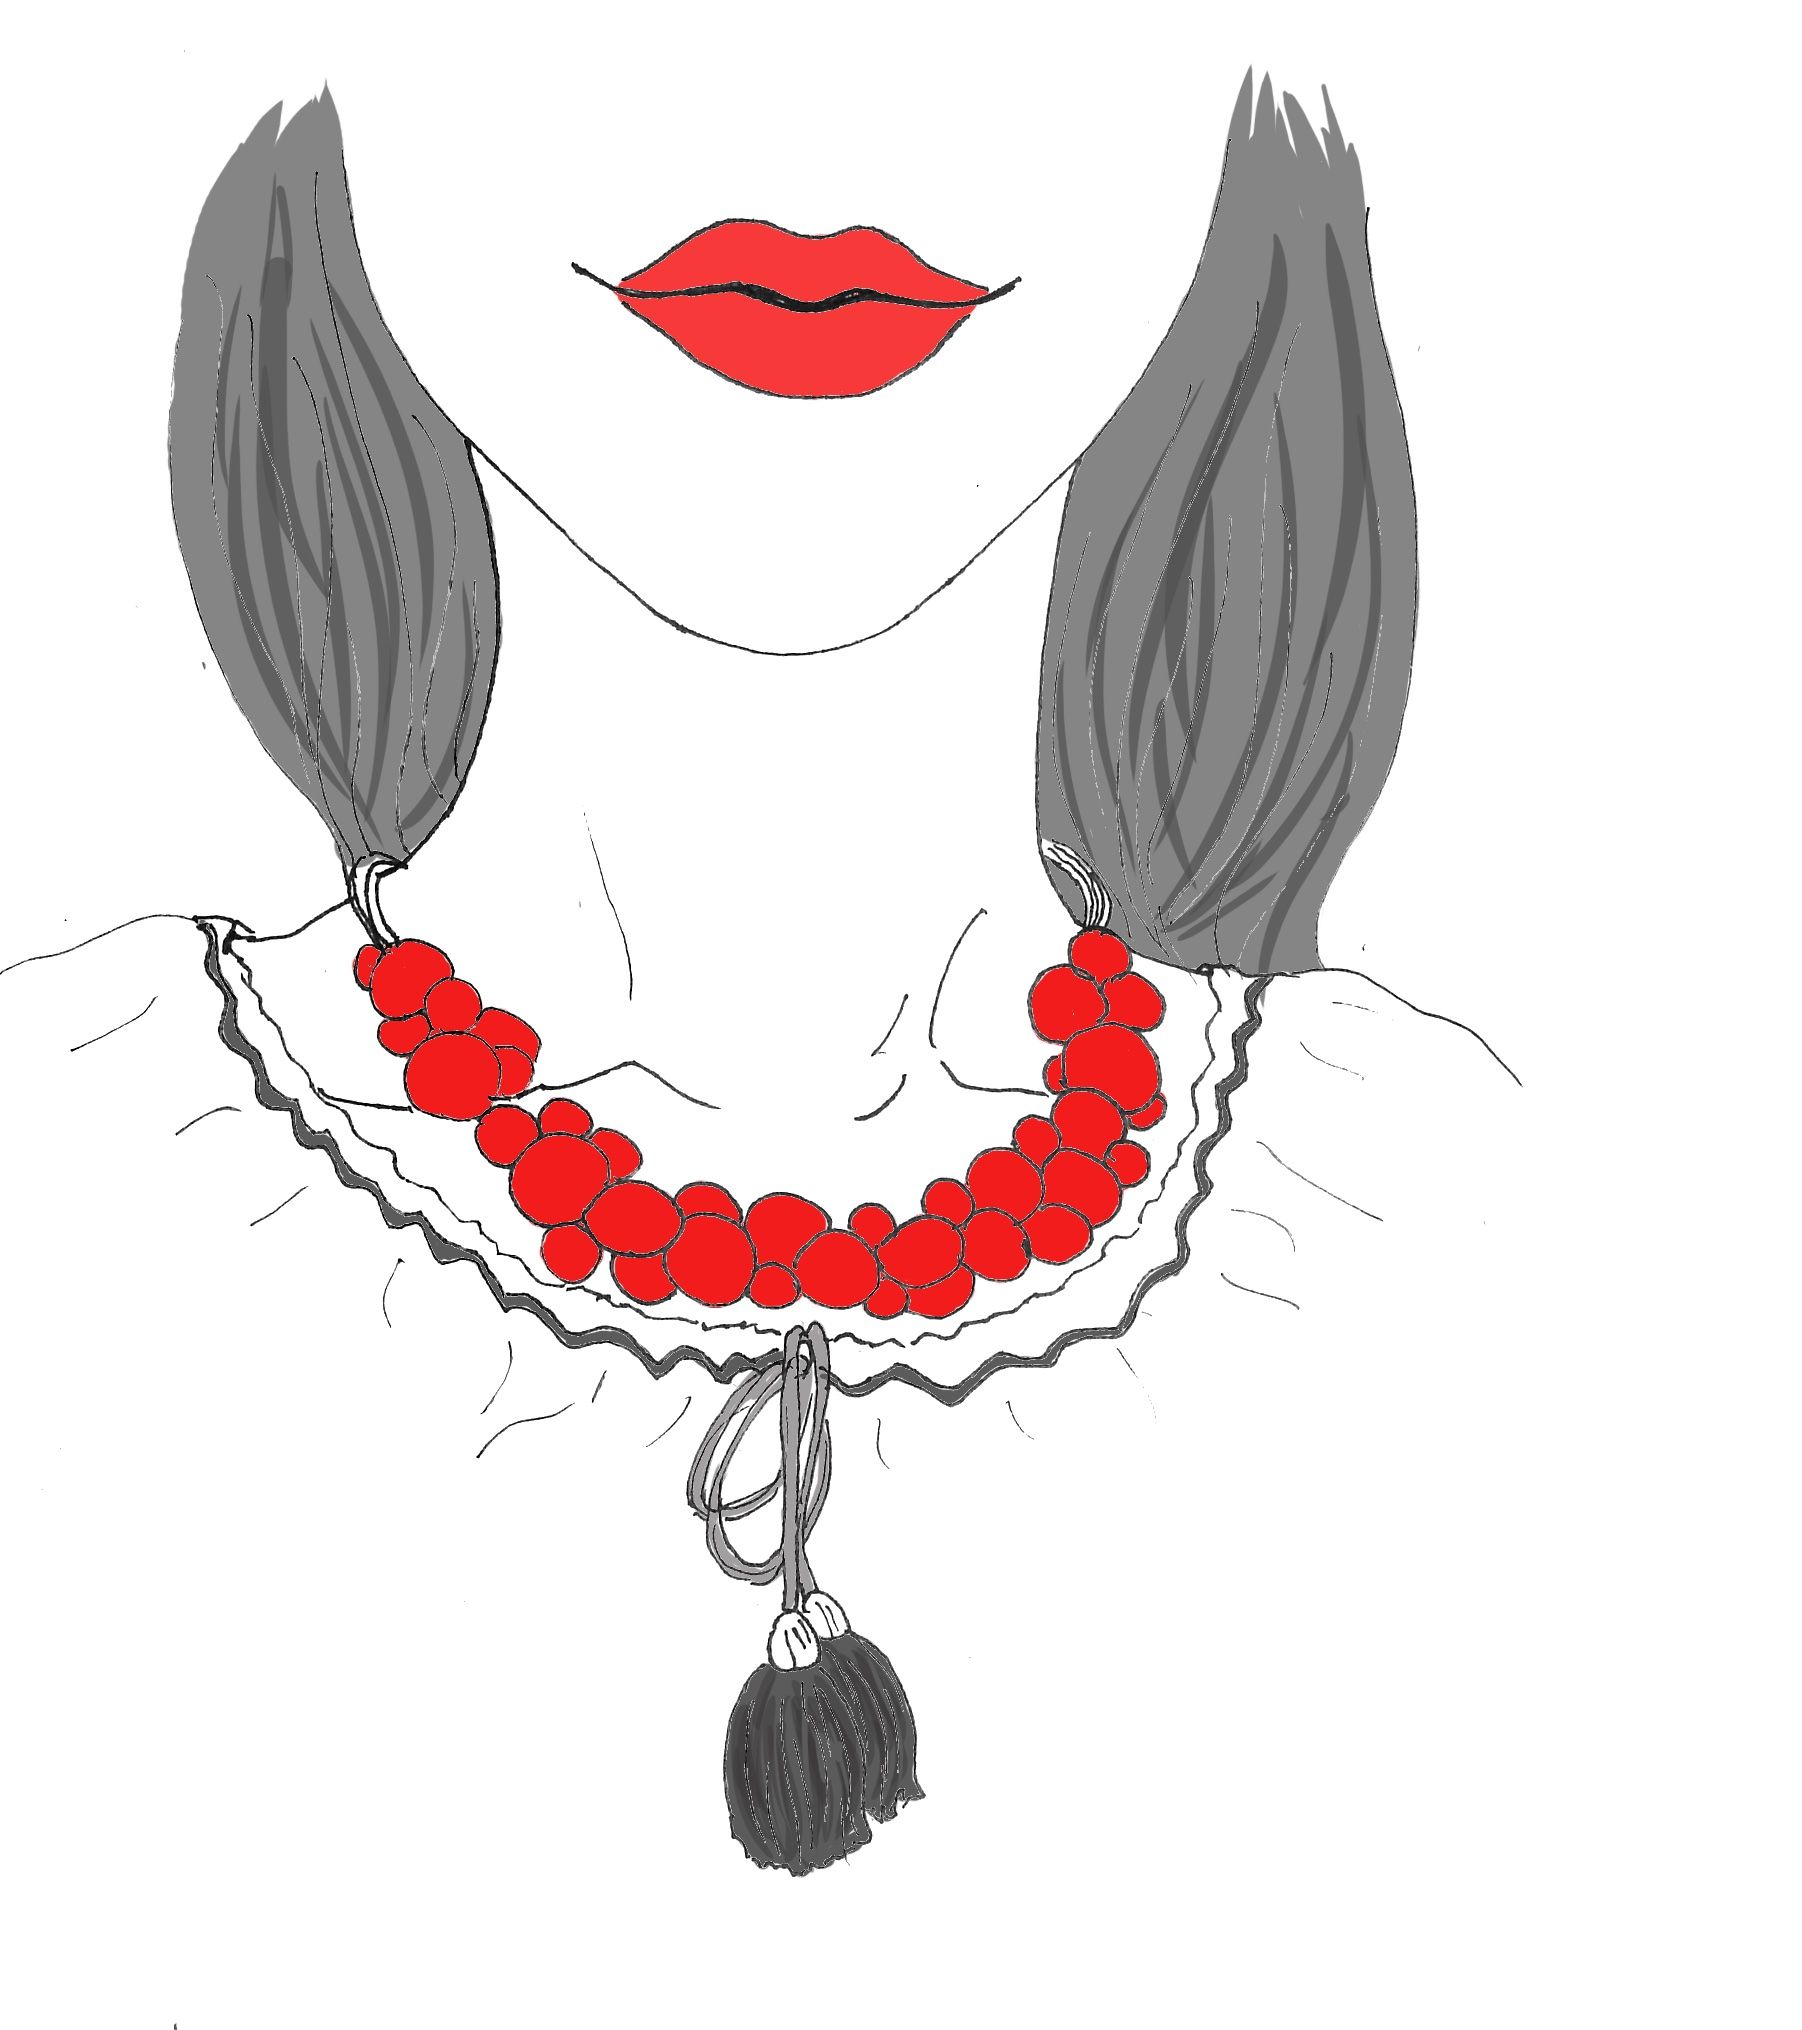 An illustration of the bottom half of a woman's face. She has bright red lips, she is wearing a Ukrainian vyshyvanka, and her necklace is made of red beads